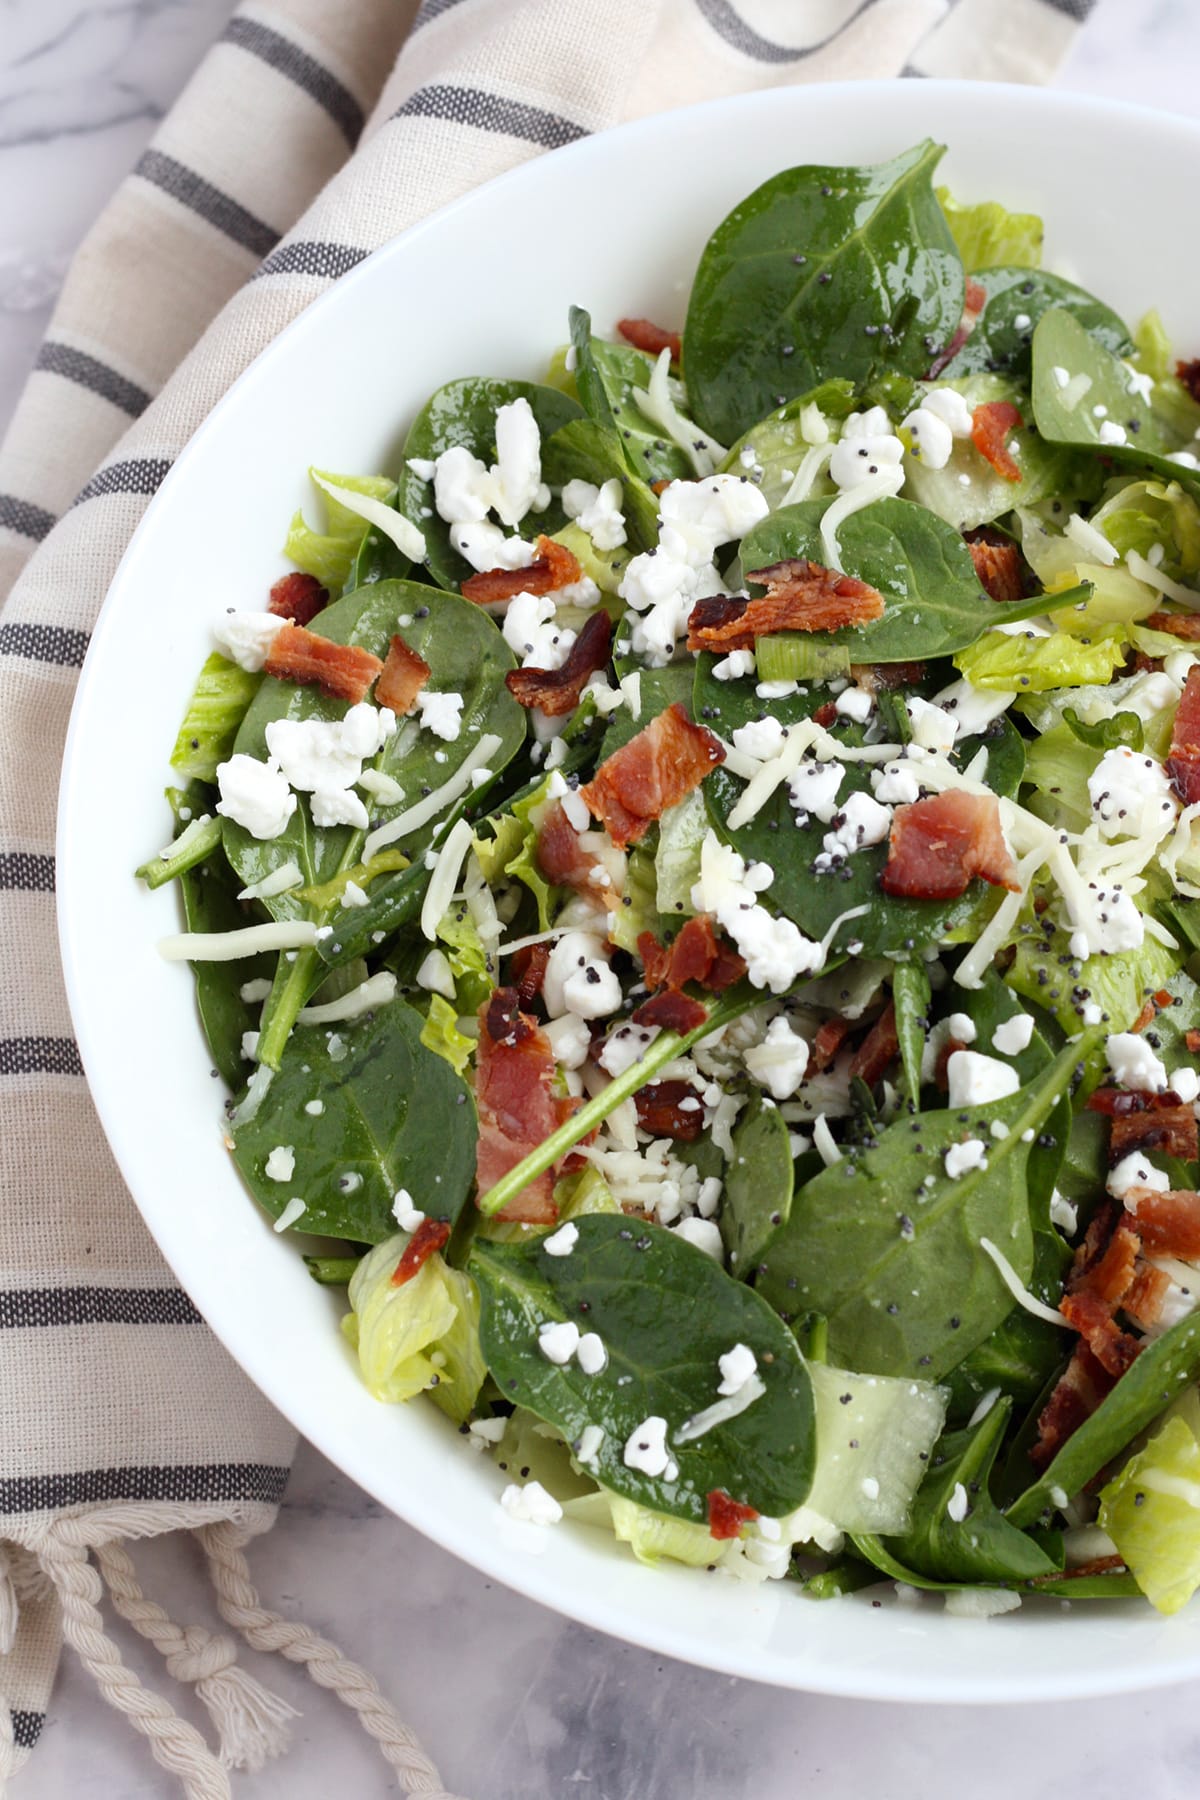 Spinach salad with cheese and bacon in a white serving bowl.